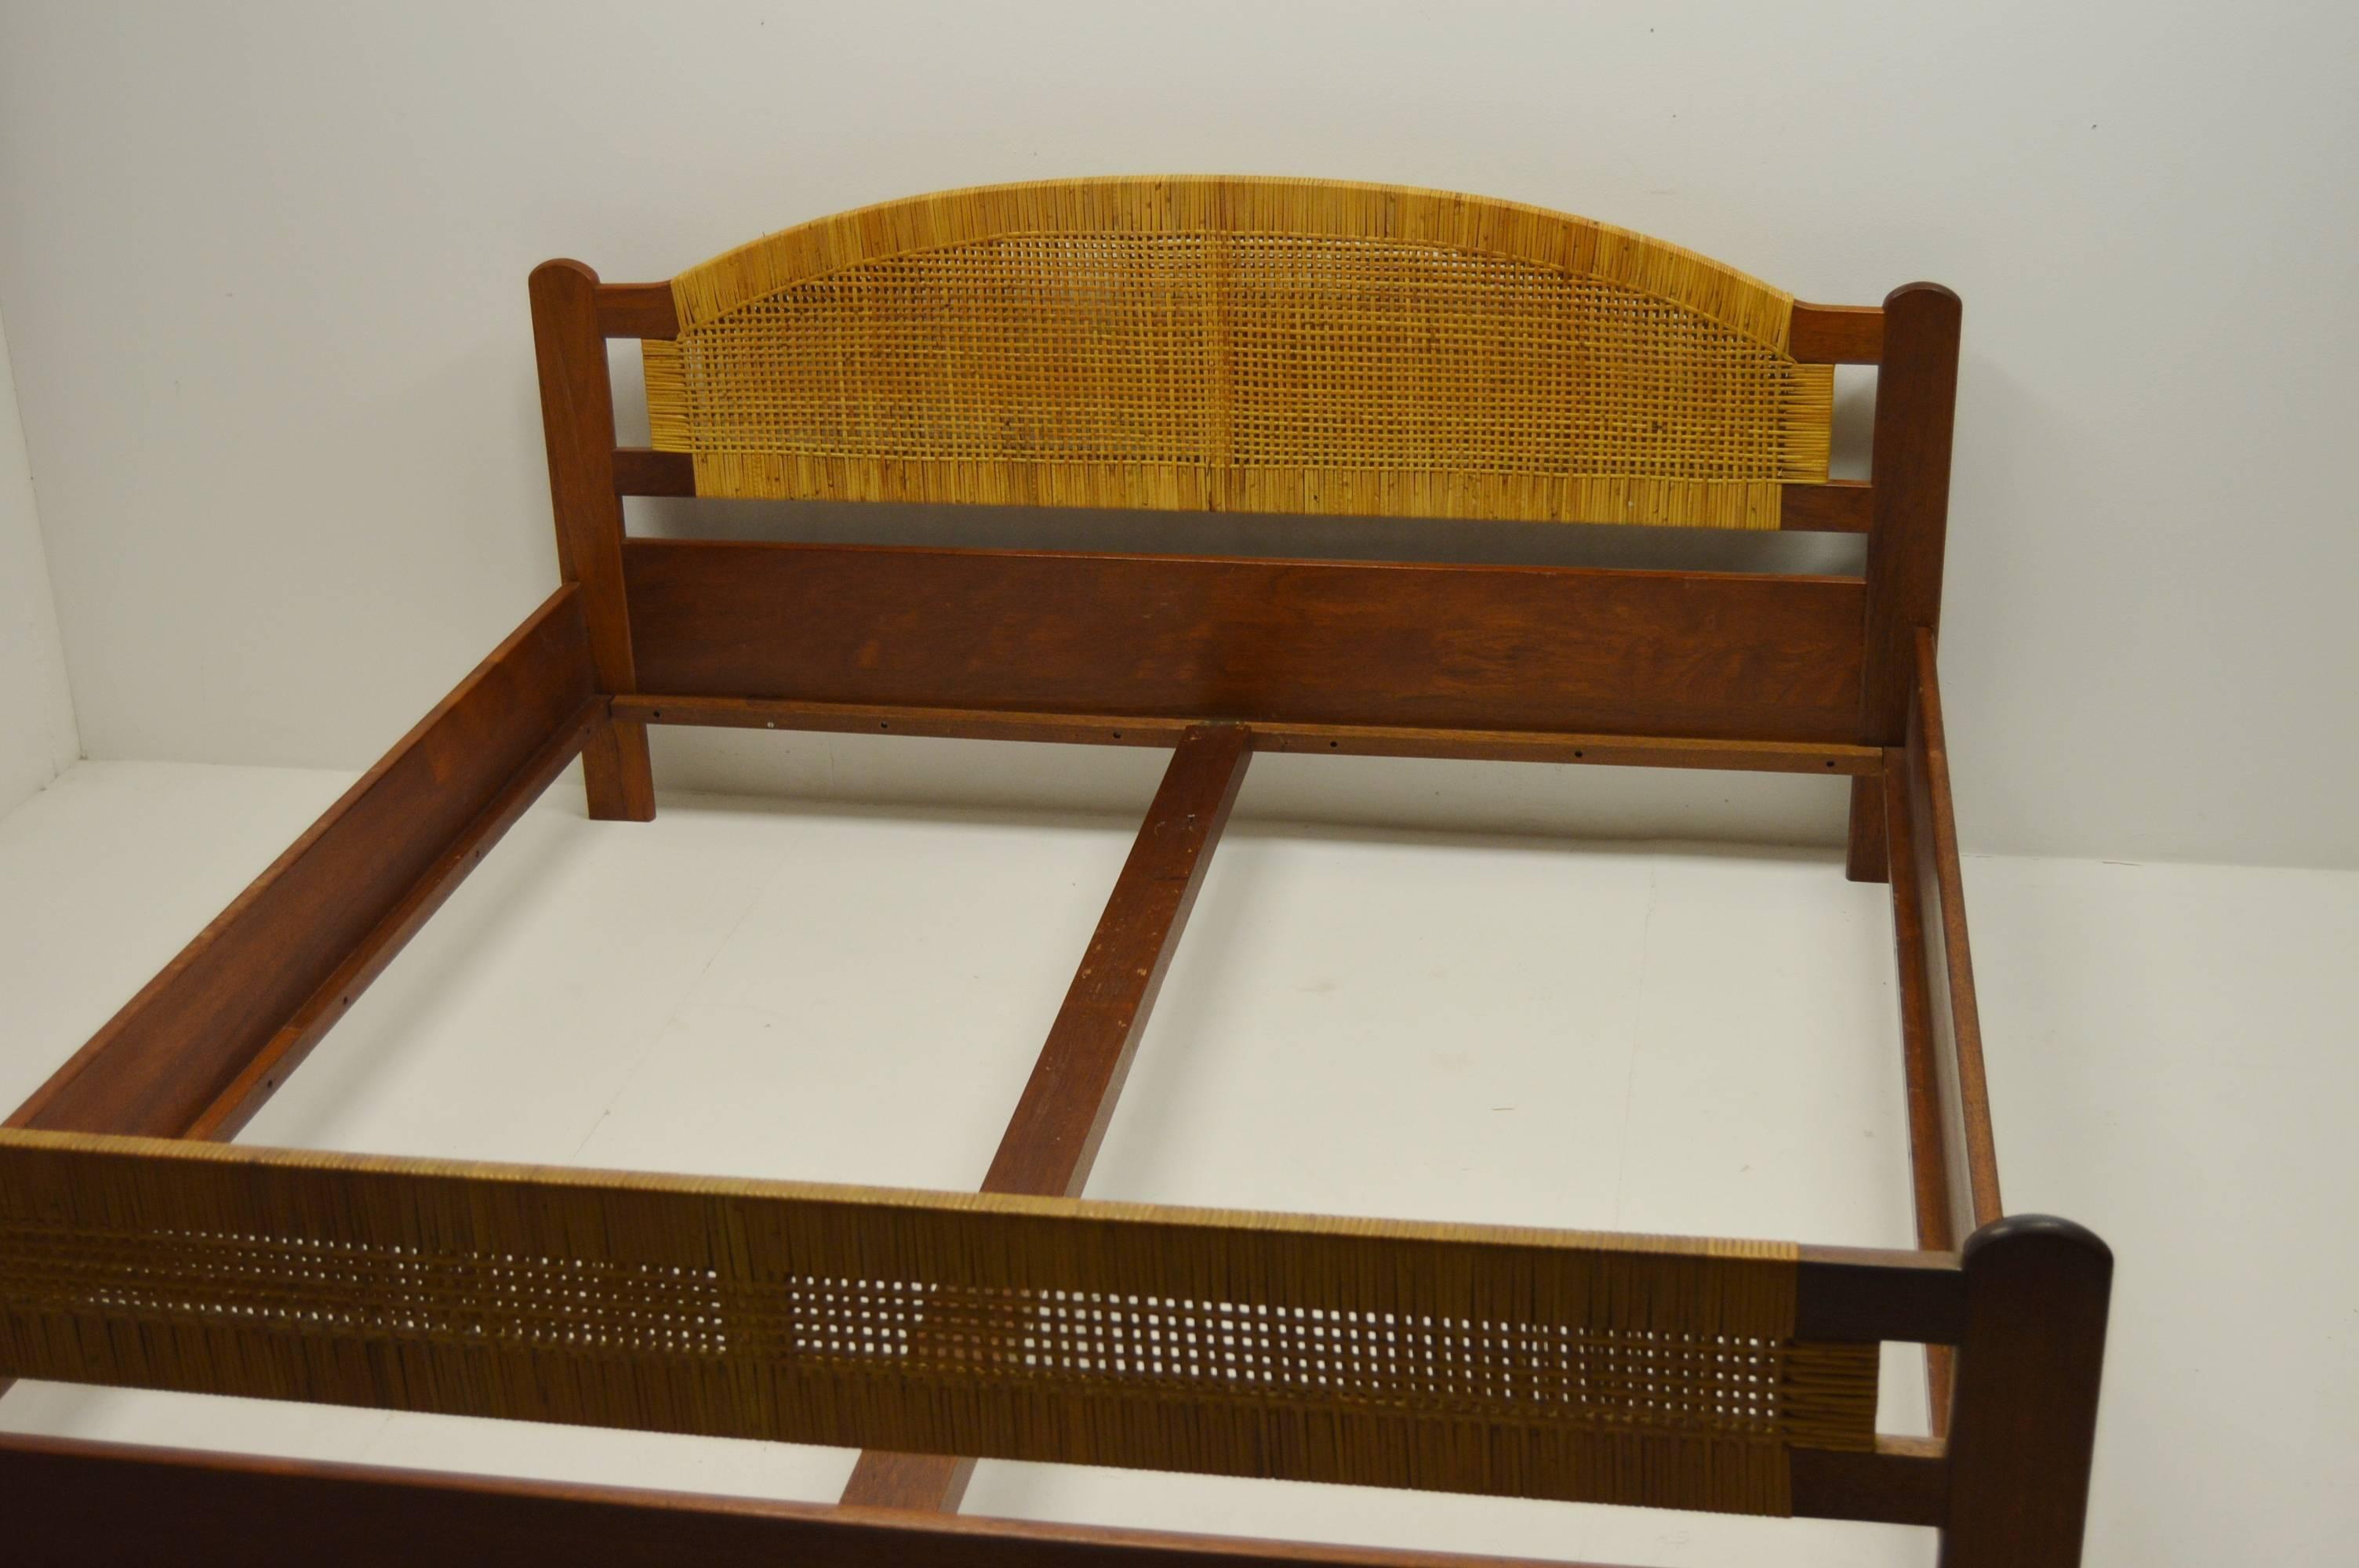 Lovely teak and rattan bedframe manufactured in Denmark in the 1960s.

- Two person bed.
- Bed measurements 201×181 cm. 
- Largest height 95 cm.